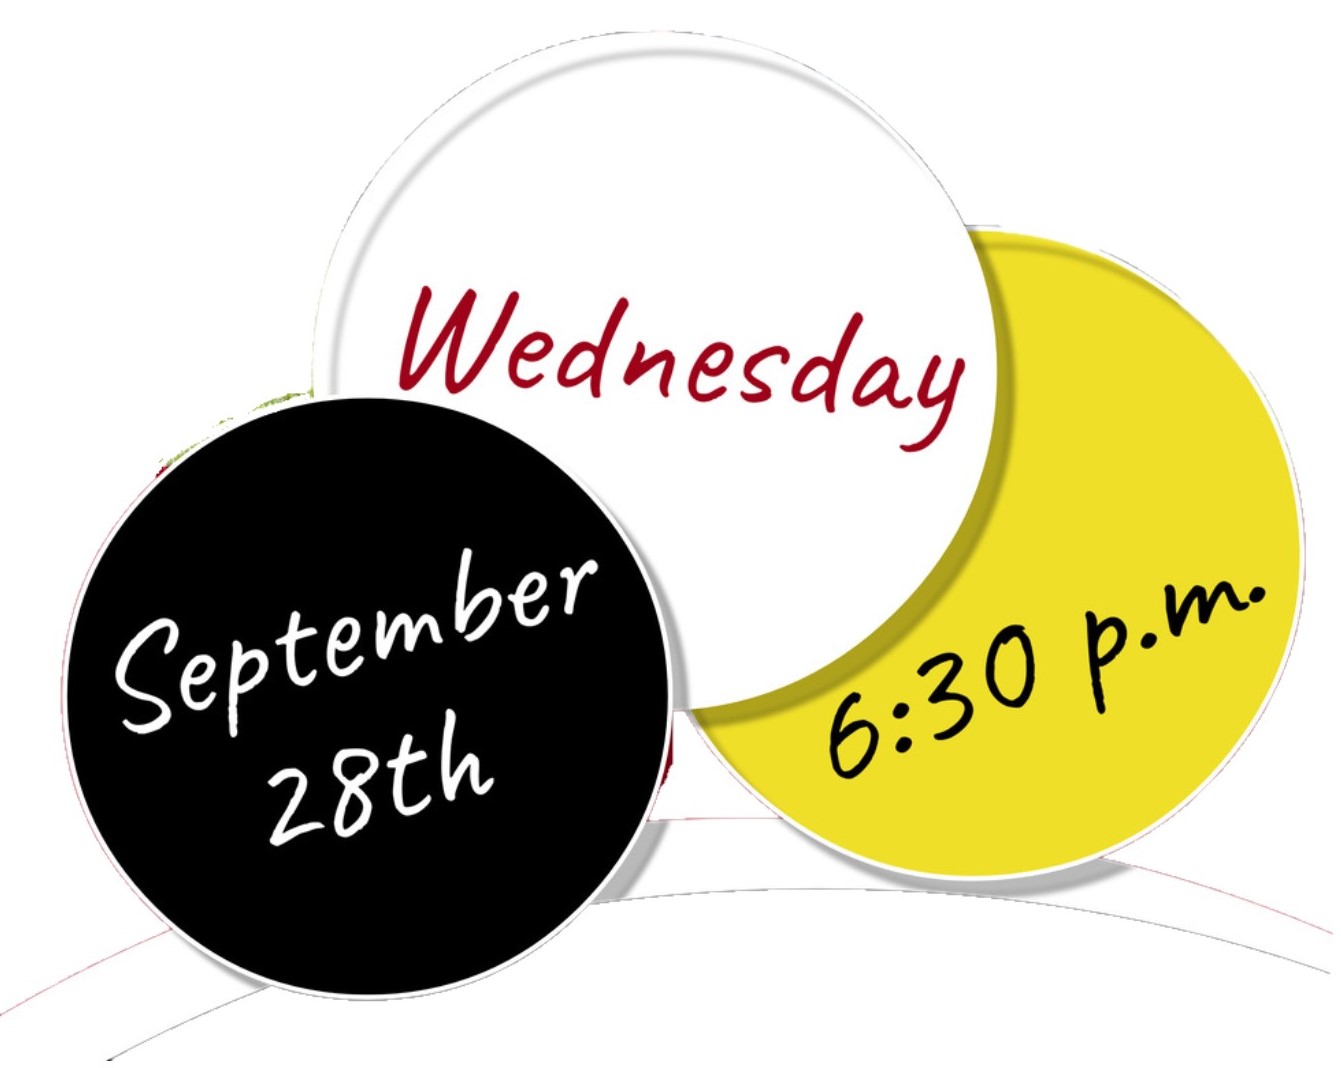 three circles with the time and date of the event: Wednesday, September 28 at 6:30 p.m.